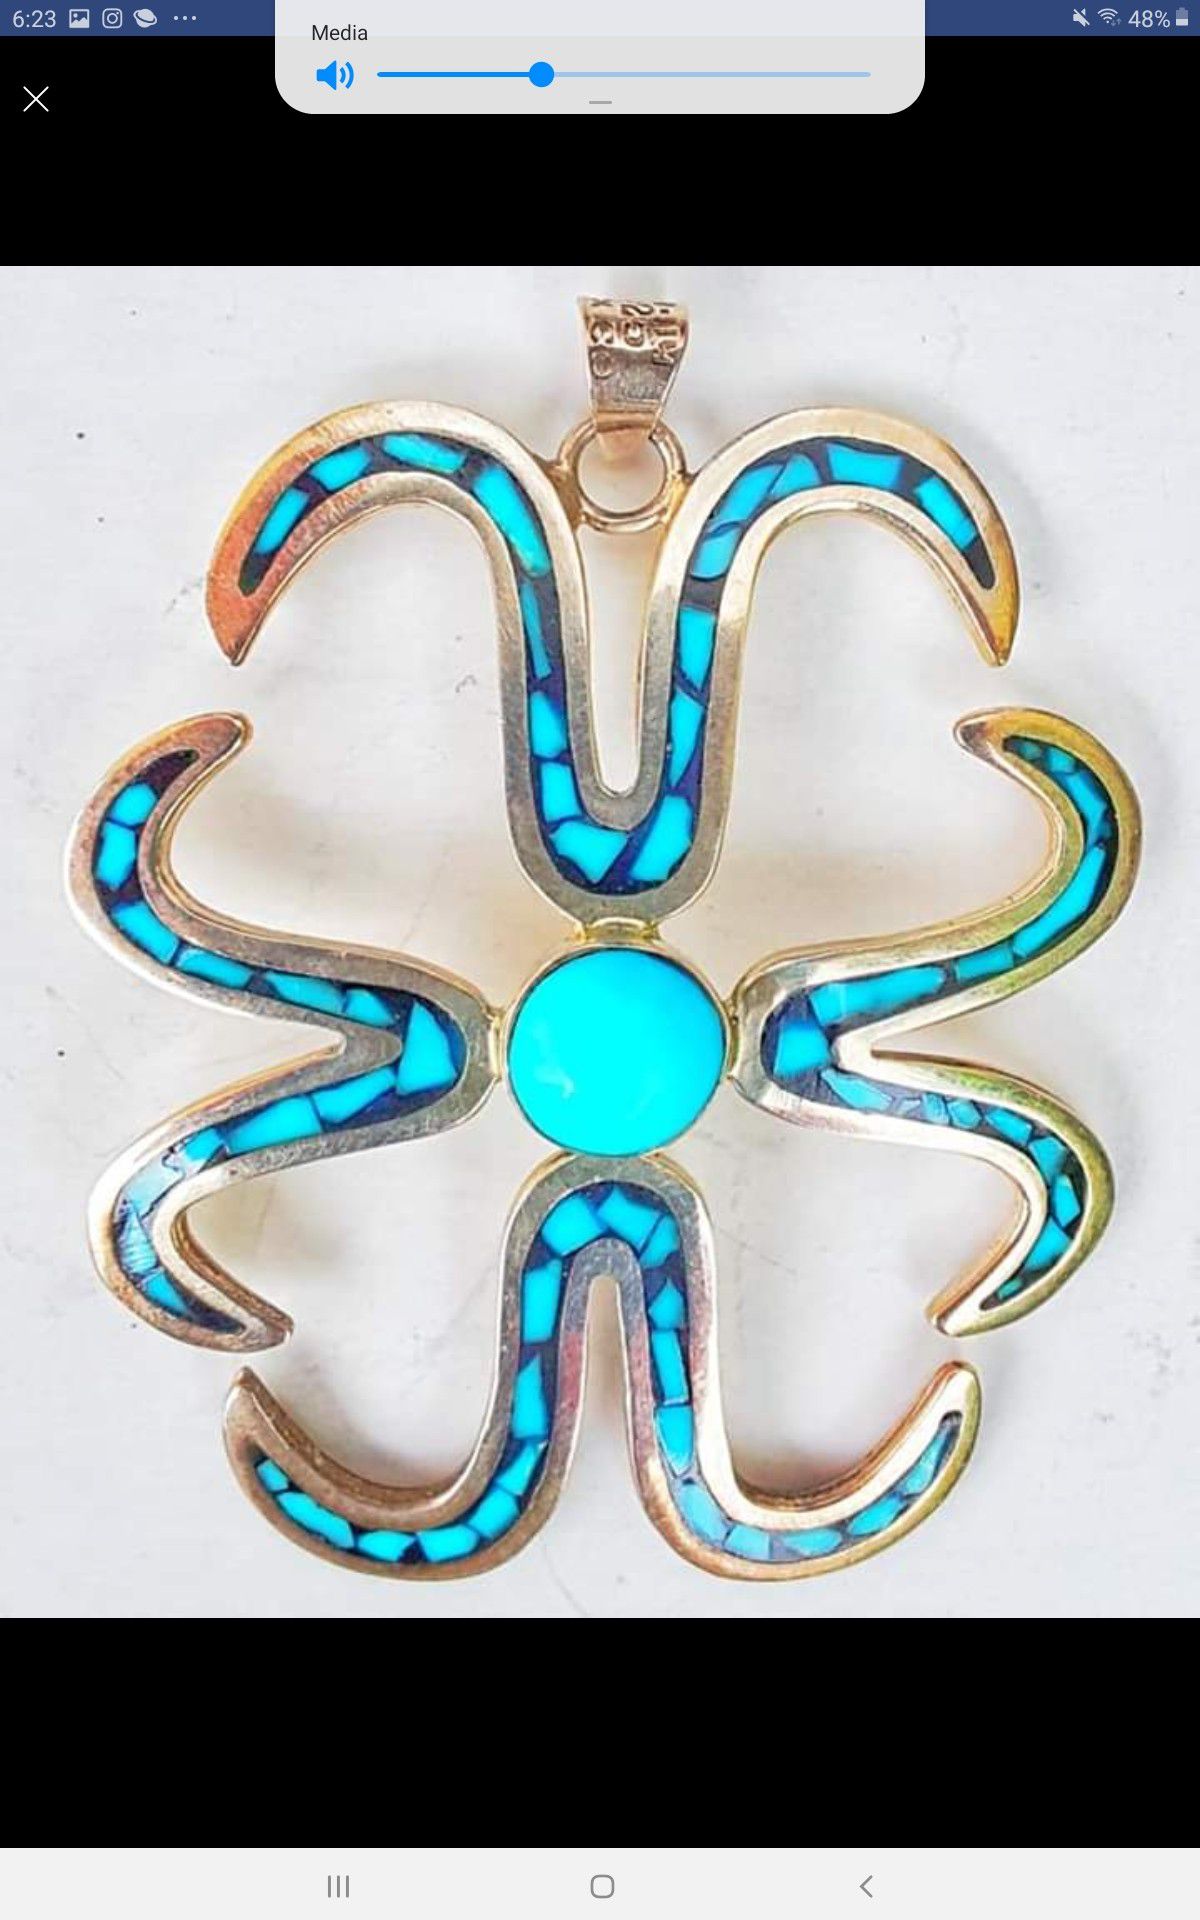 Taxco signed sterling silver 925 mexican silver and turquoise inlay 2.5" x 2.25" pendant